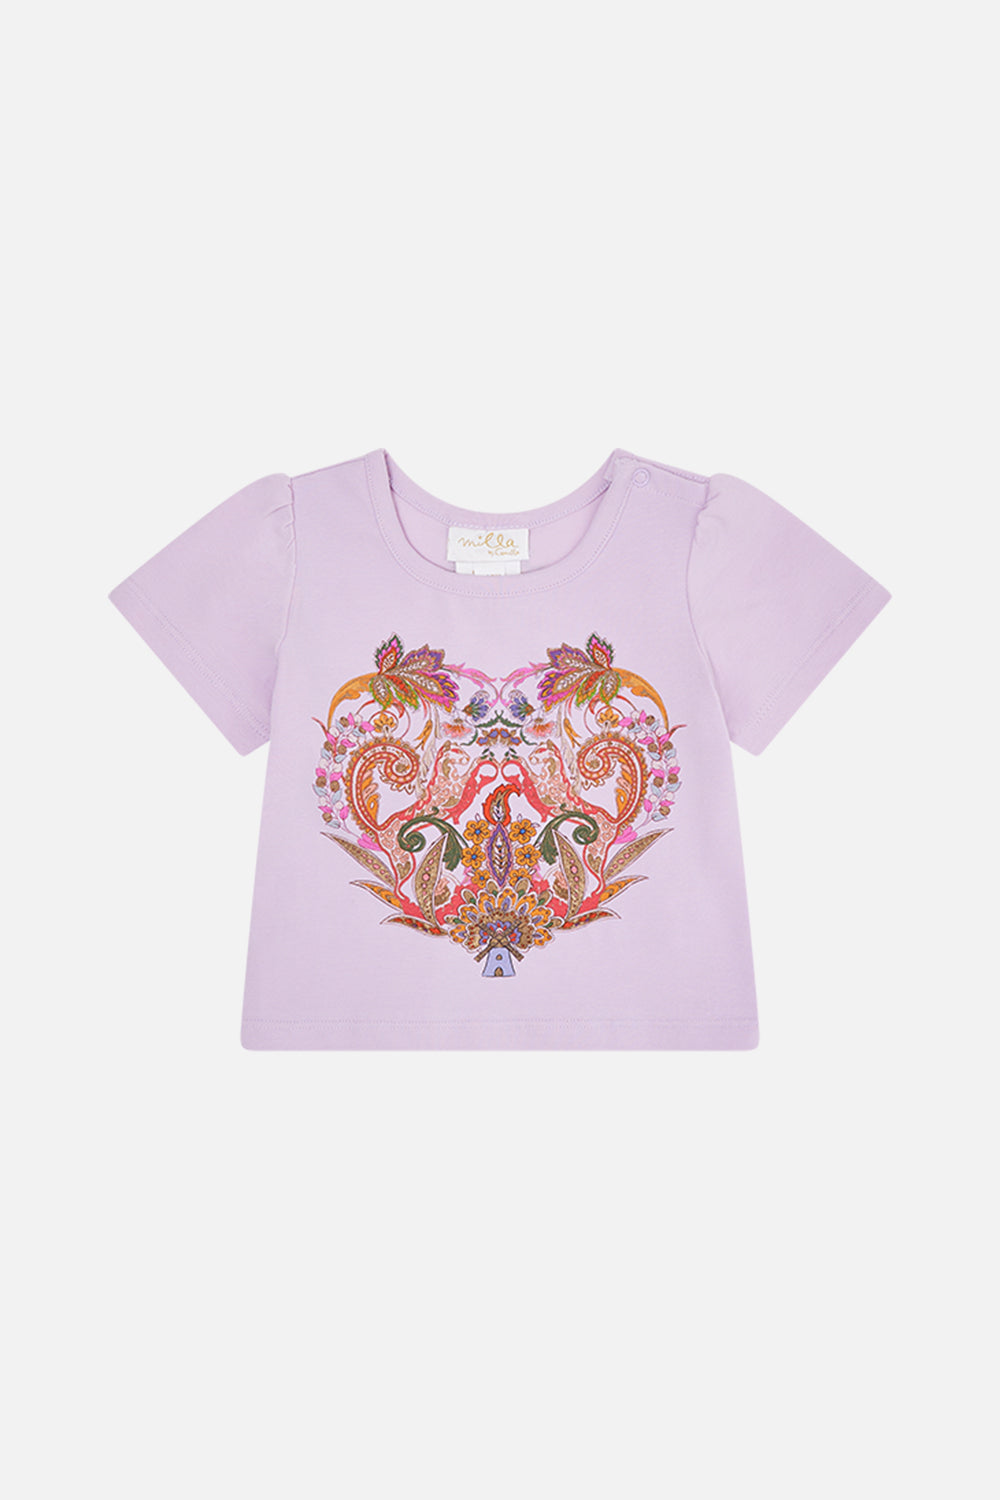 Milla by CAMILLA babbies t shirt in Clever Clogs print